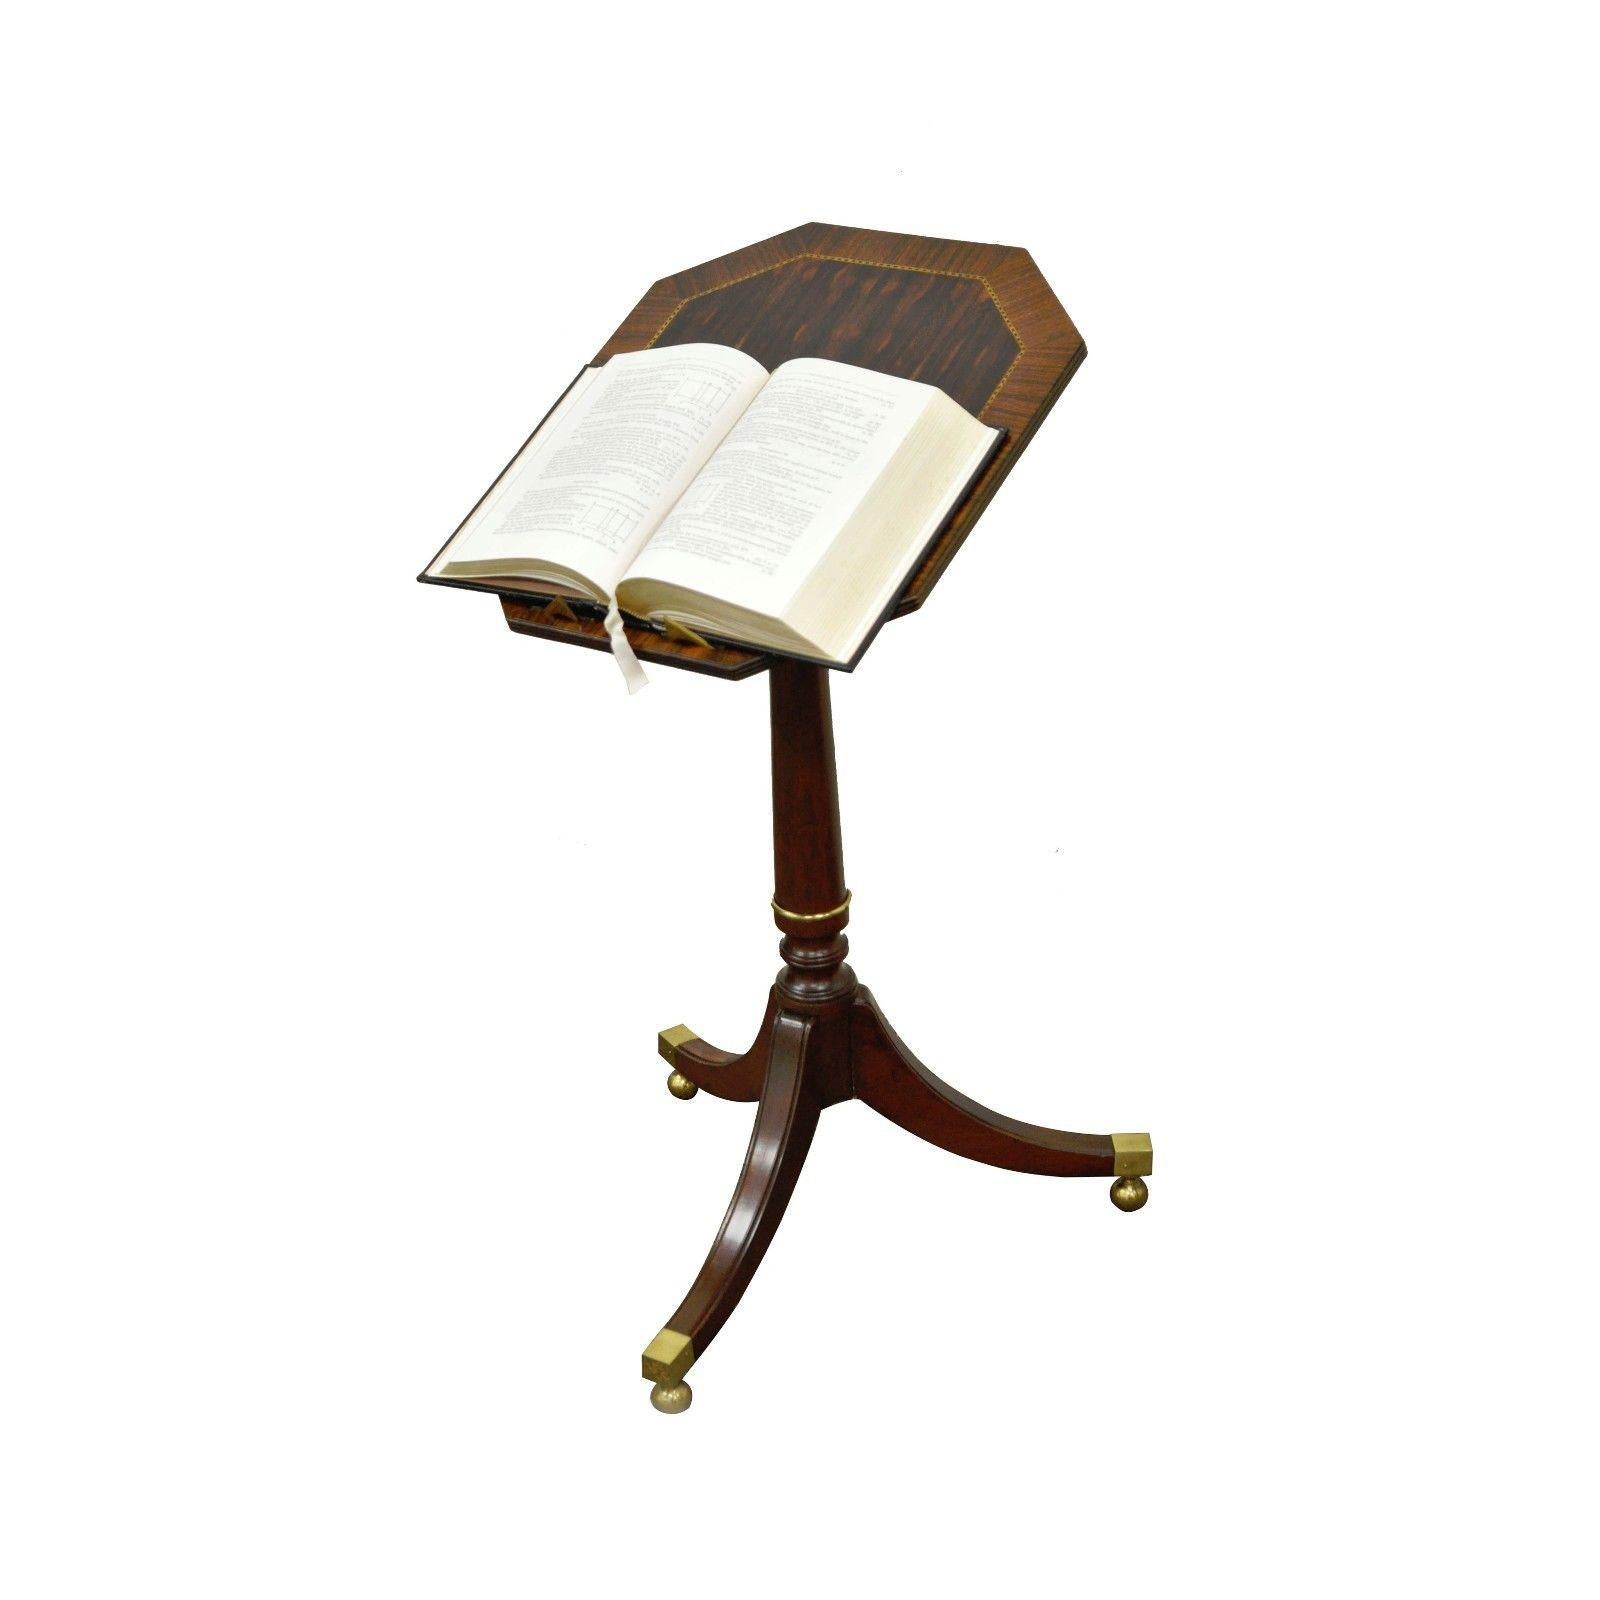 Vintage Baker Furniture tilt-top book stand / accent table. Item features beautiful mahogany base, Tilting rosewood and other exotic wood inlaid top, Solid brass accents with pop out brass book holders on the top. Great quality item, circa mid-late